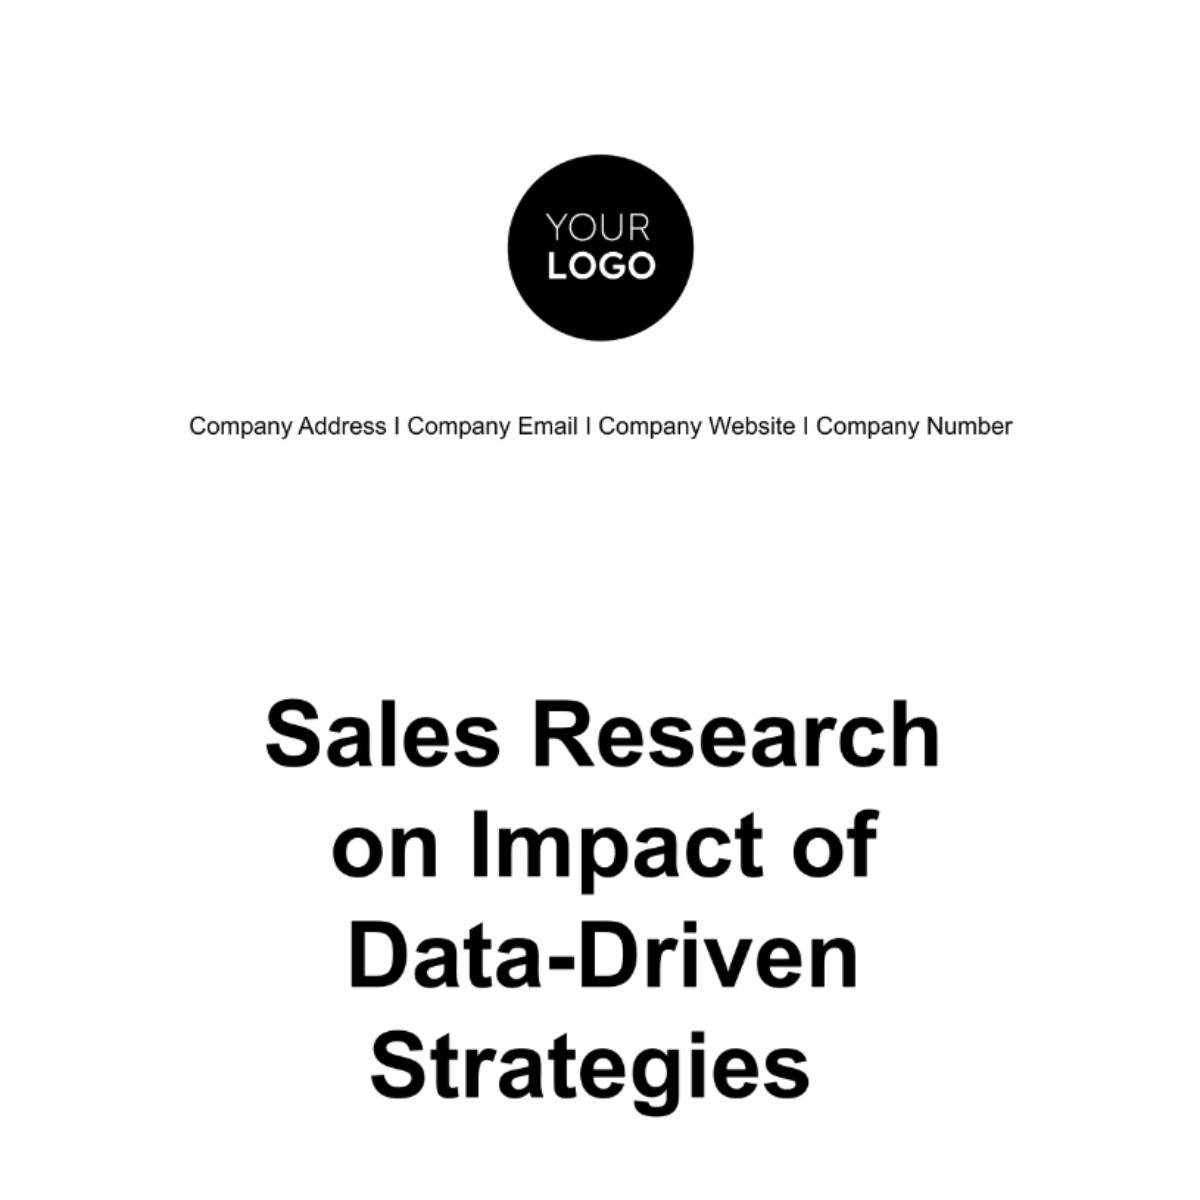 Sales Research on Impact of Data-Driven Strategies Template